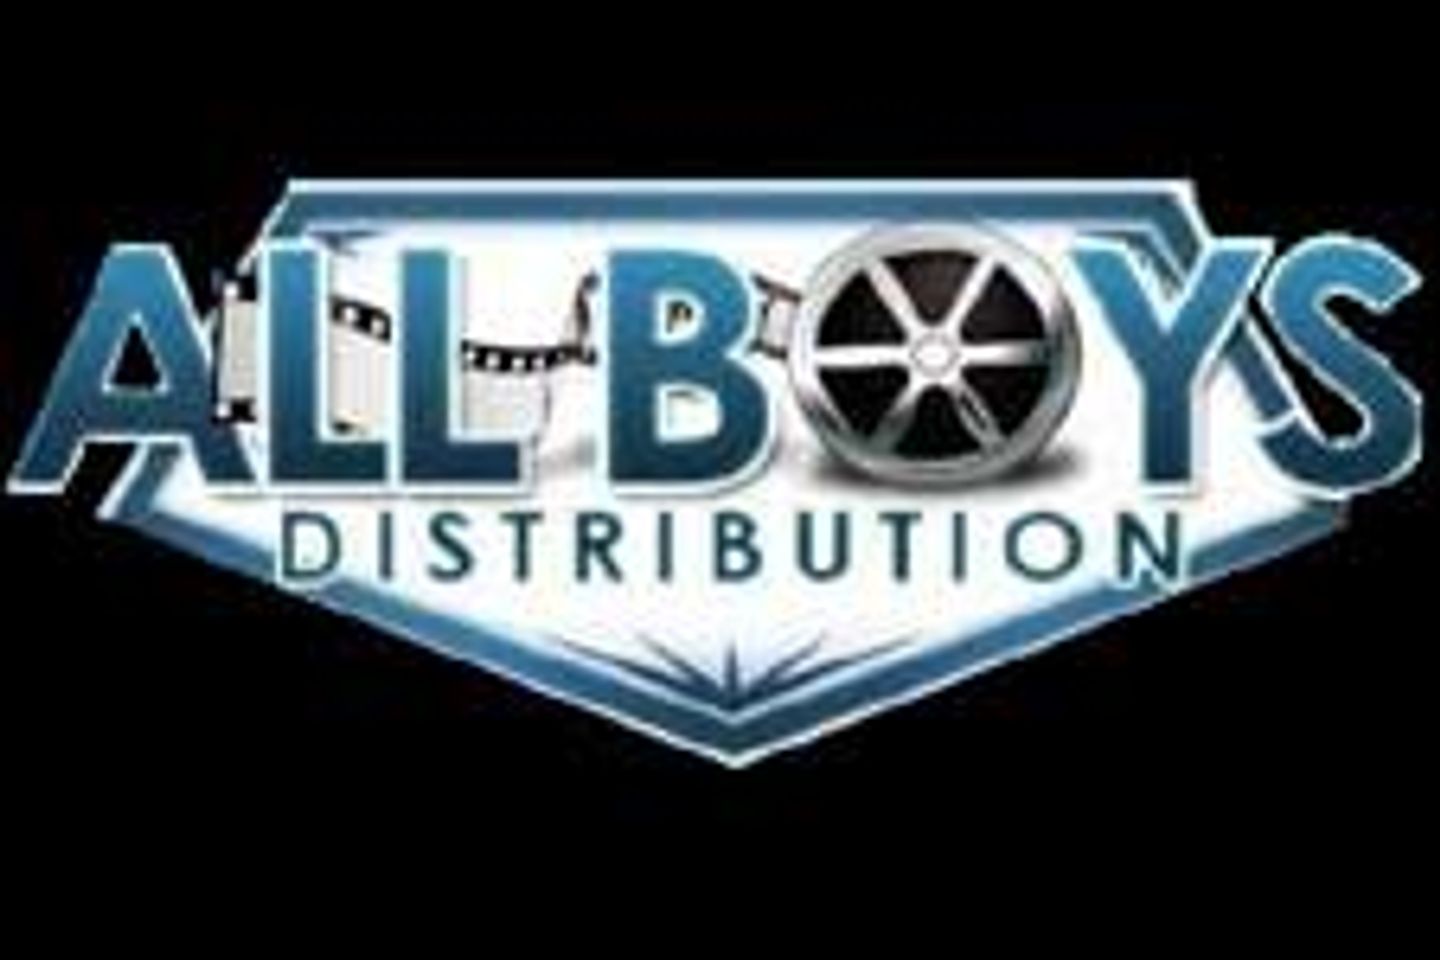 All Boys to Distribute Feature Four-Packs